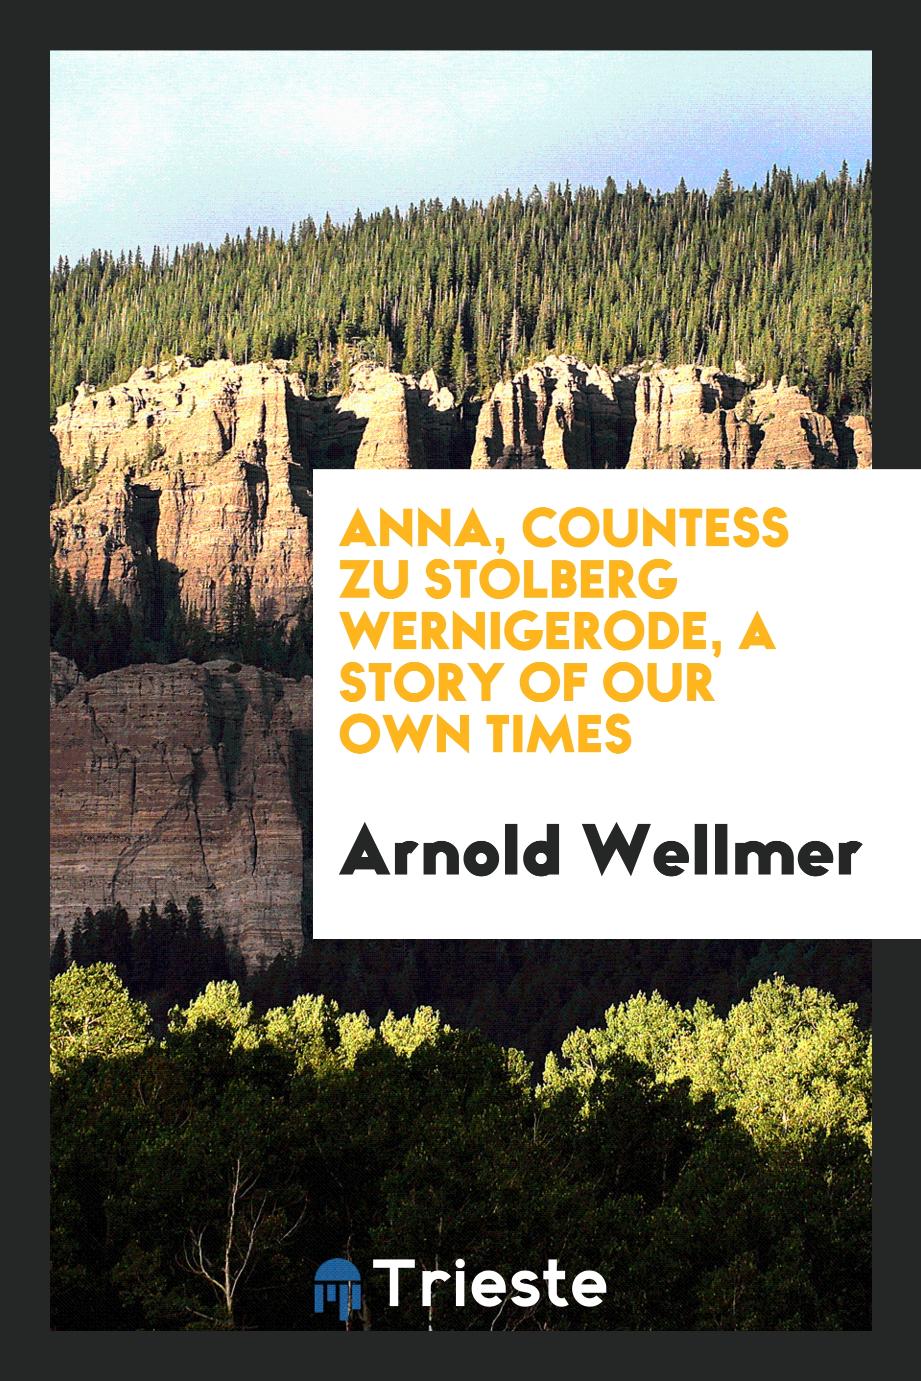 Anna, Countess zu Stolberg Wernigerode, a story of our own times